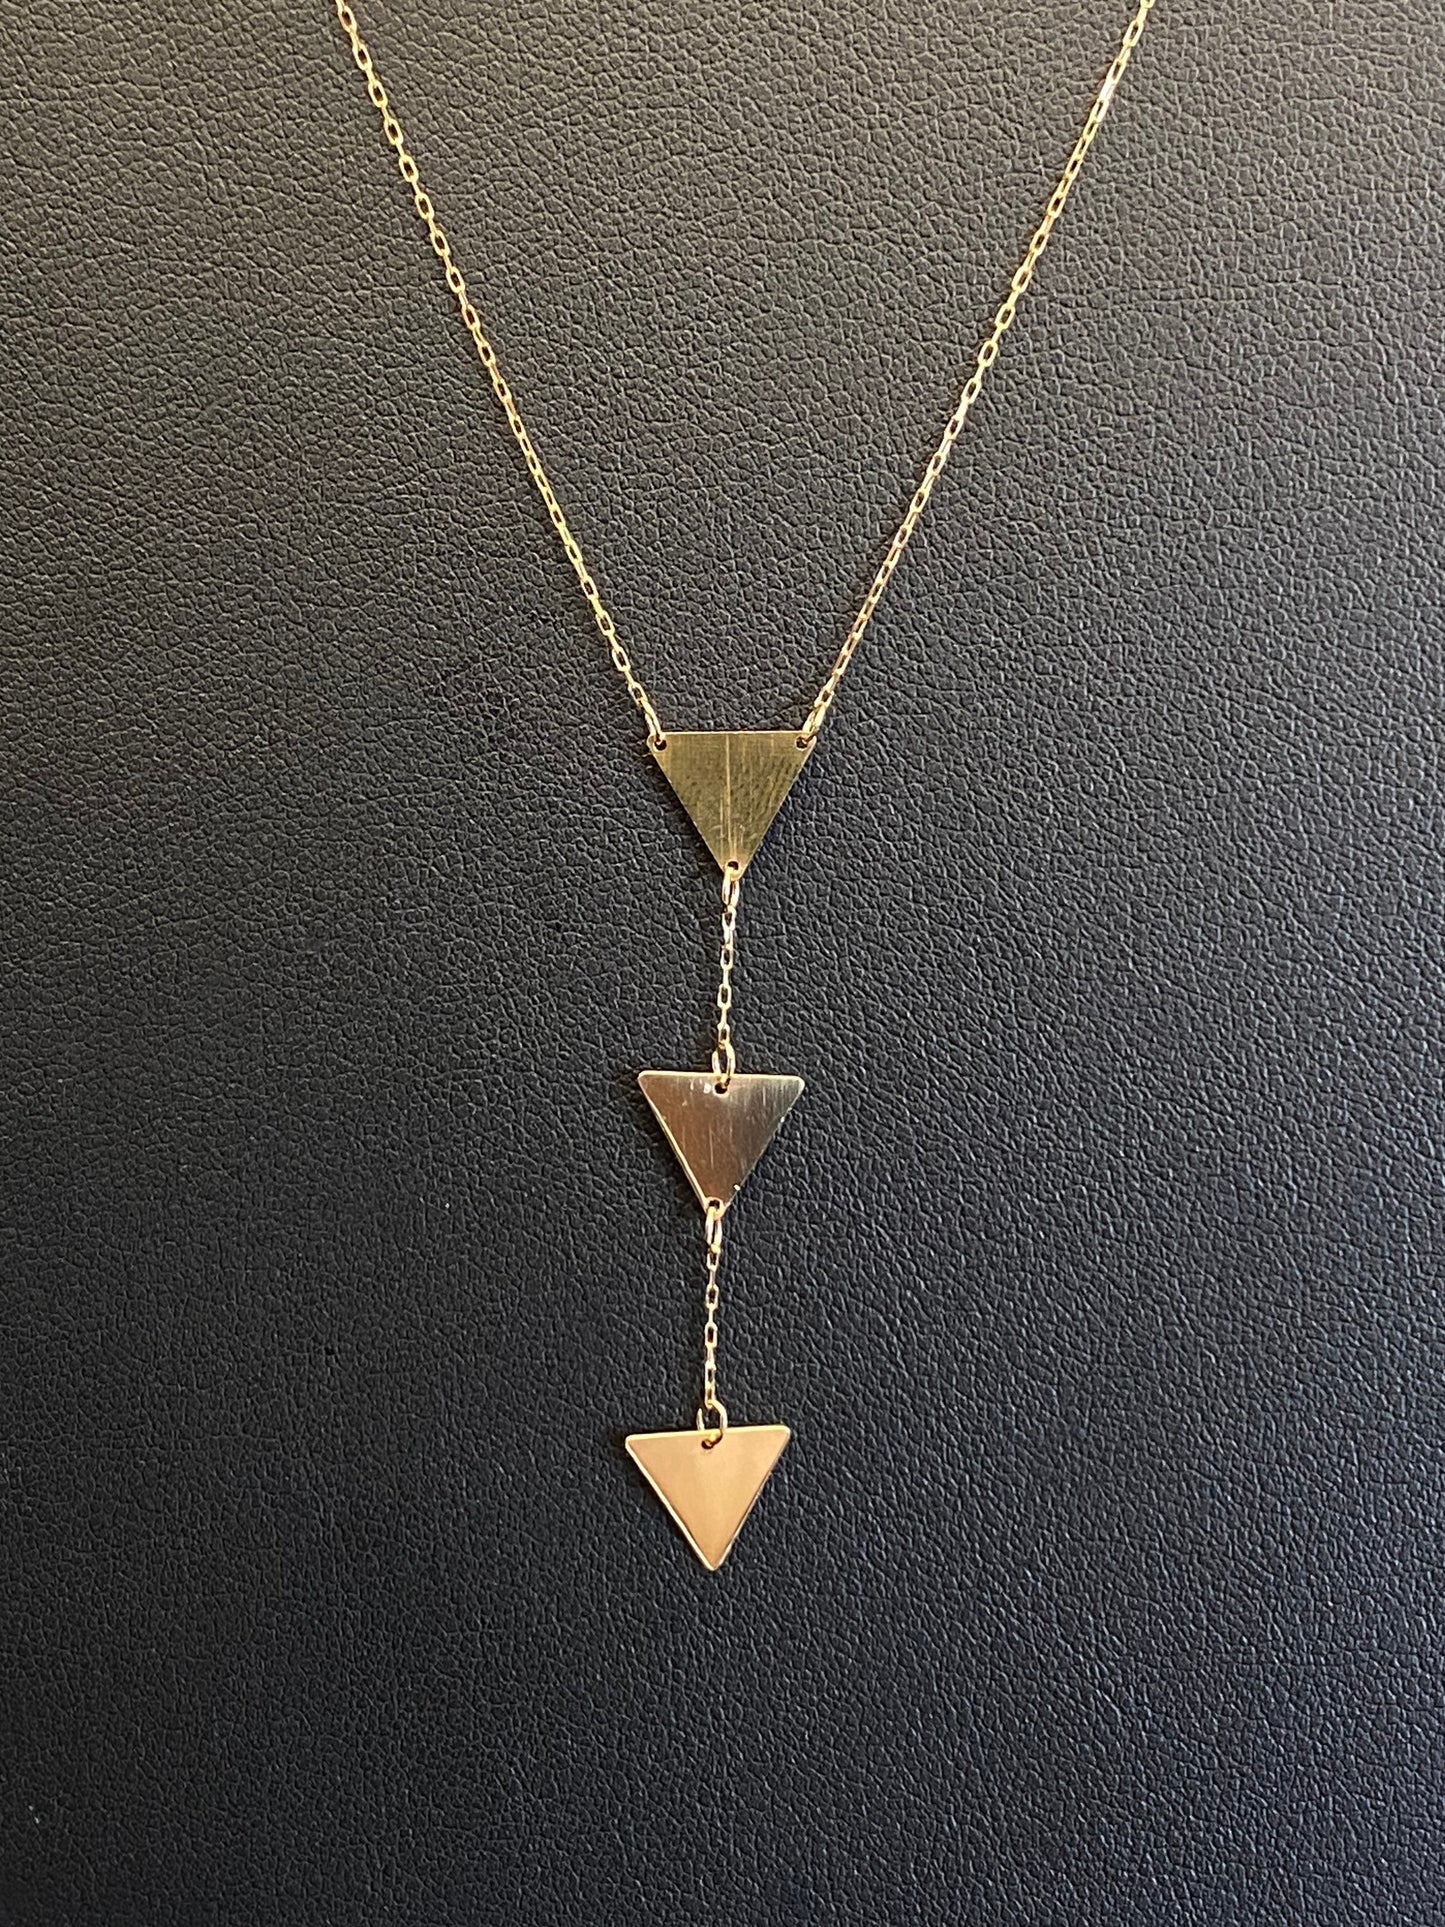 Yellow Gold Triangle Dangle Drop Lariat Pendant Chain Necklace